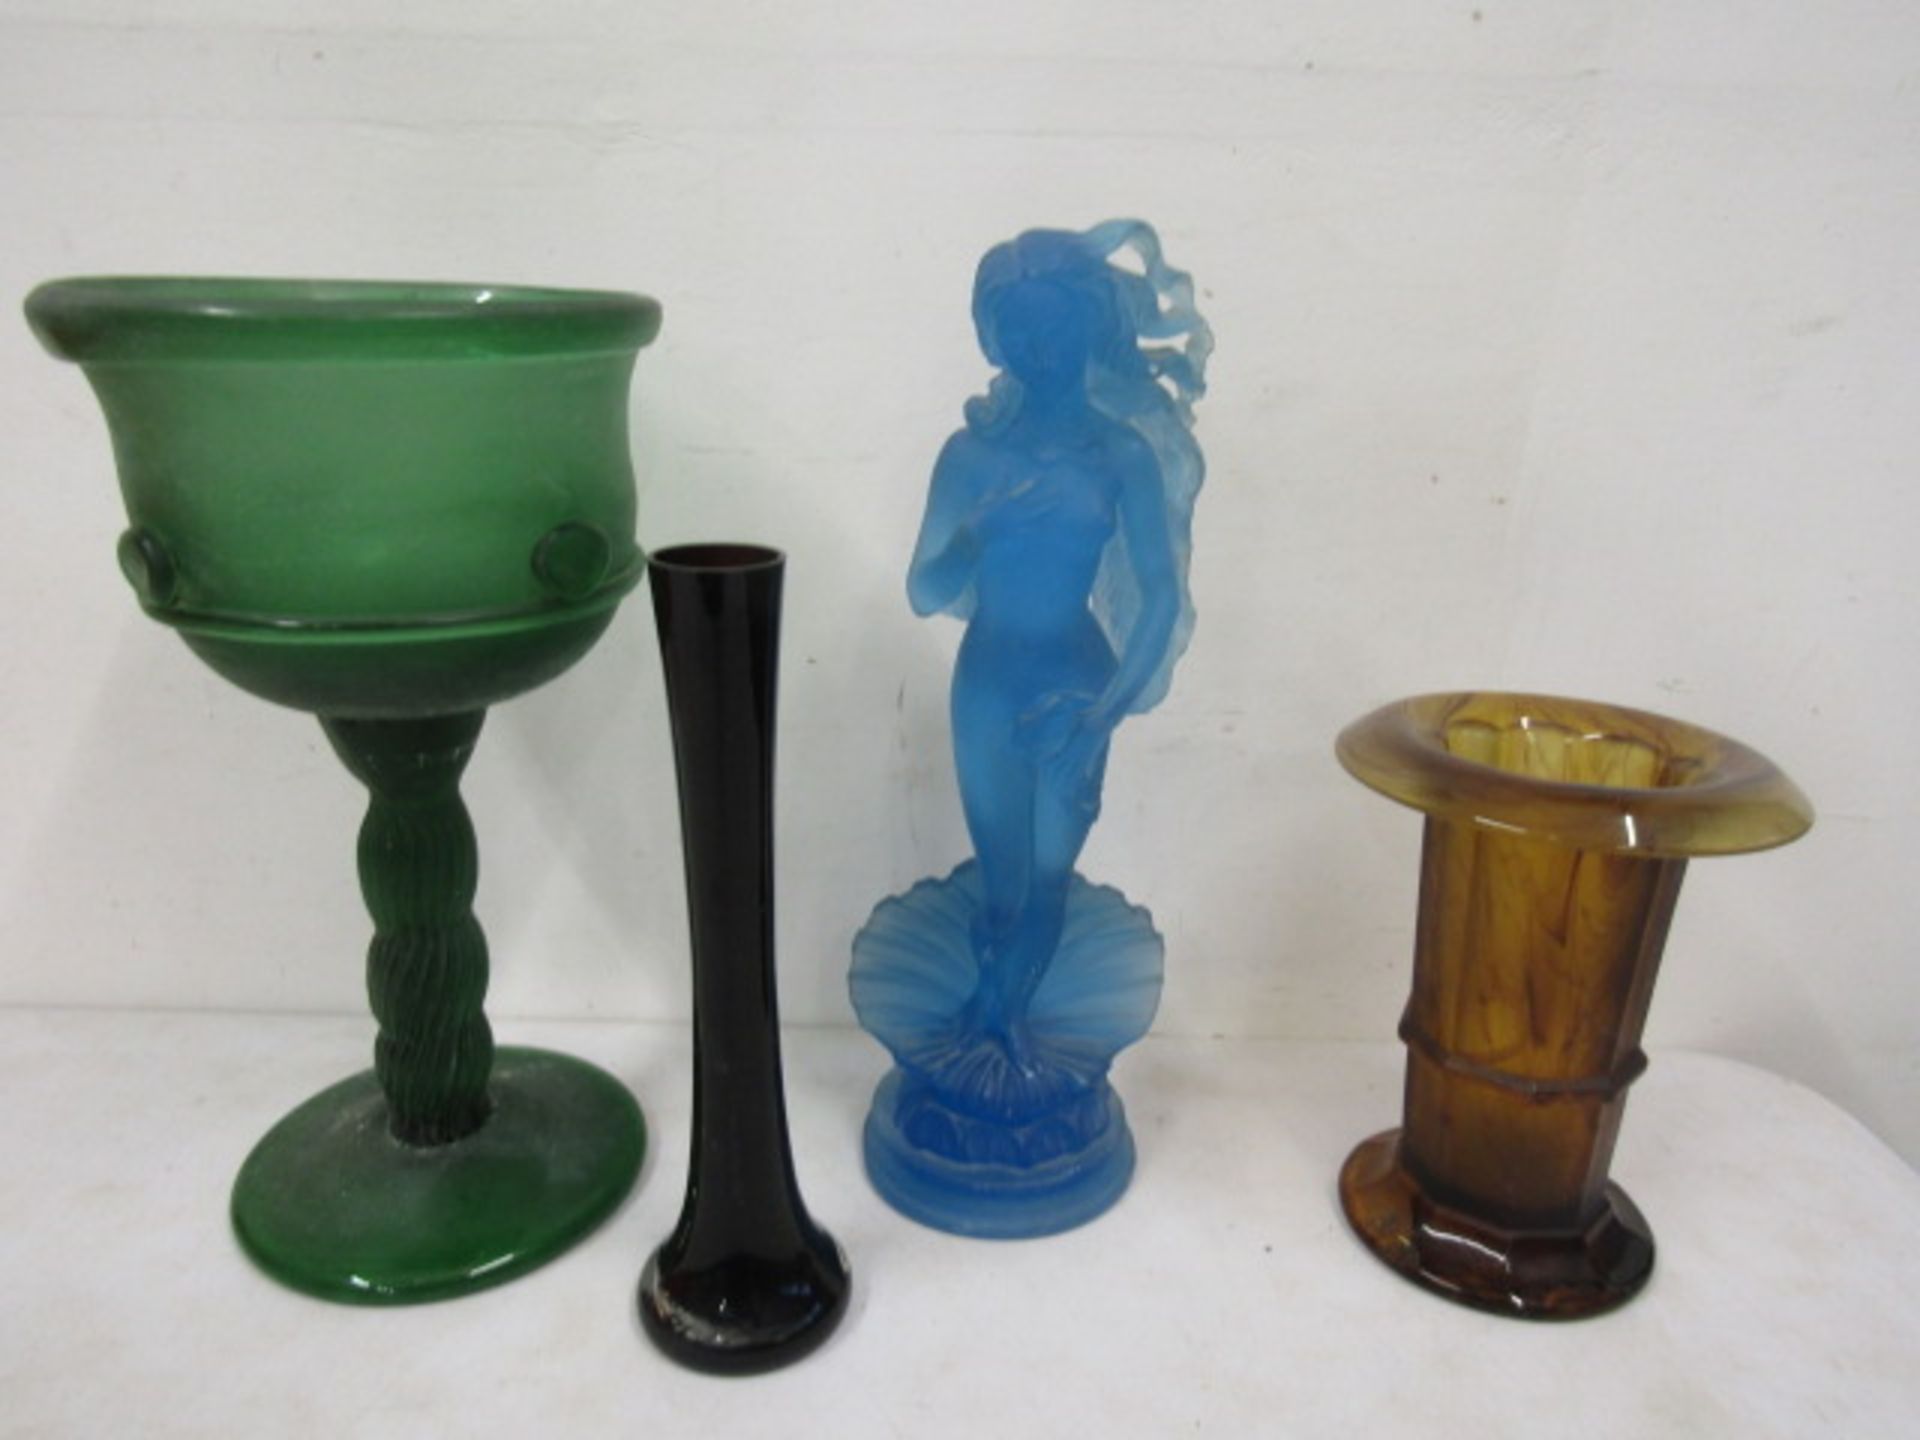 Art deco pressed glass lady, green stemmed vase, brown glass vase and one other